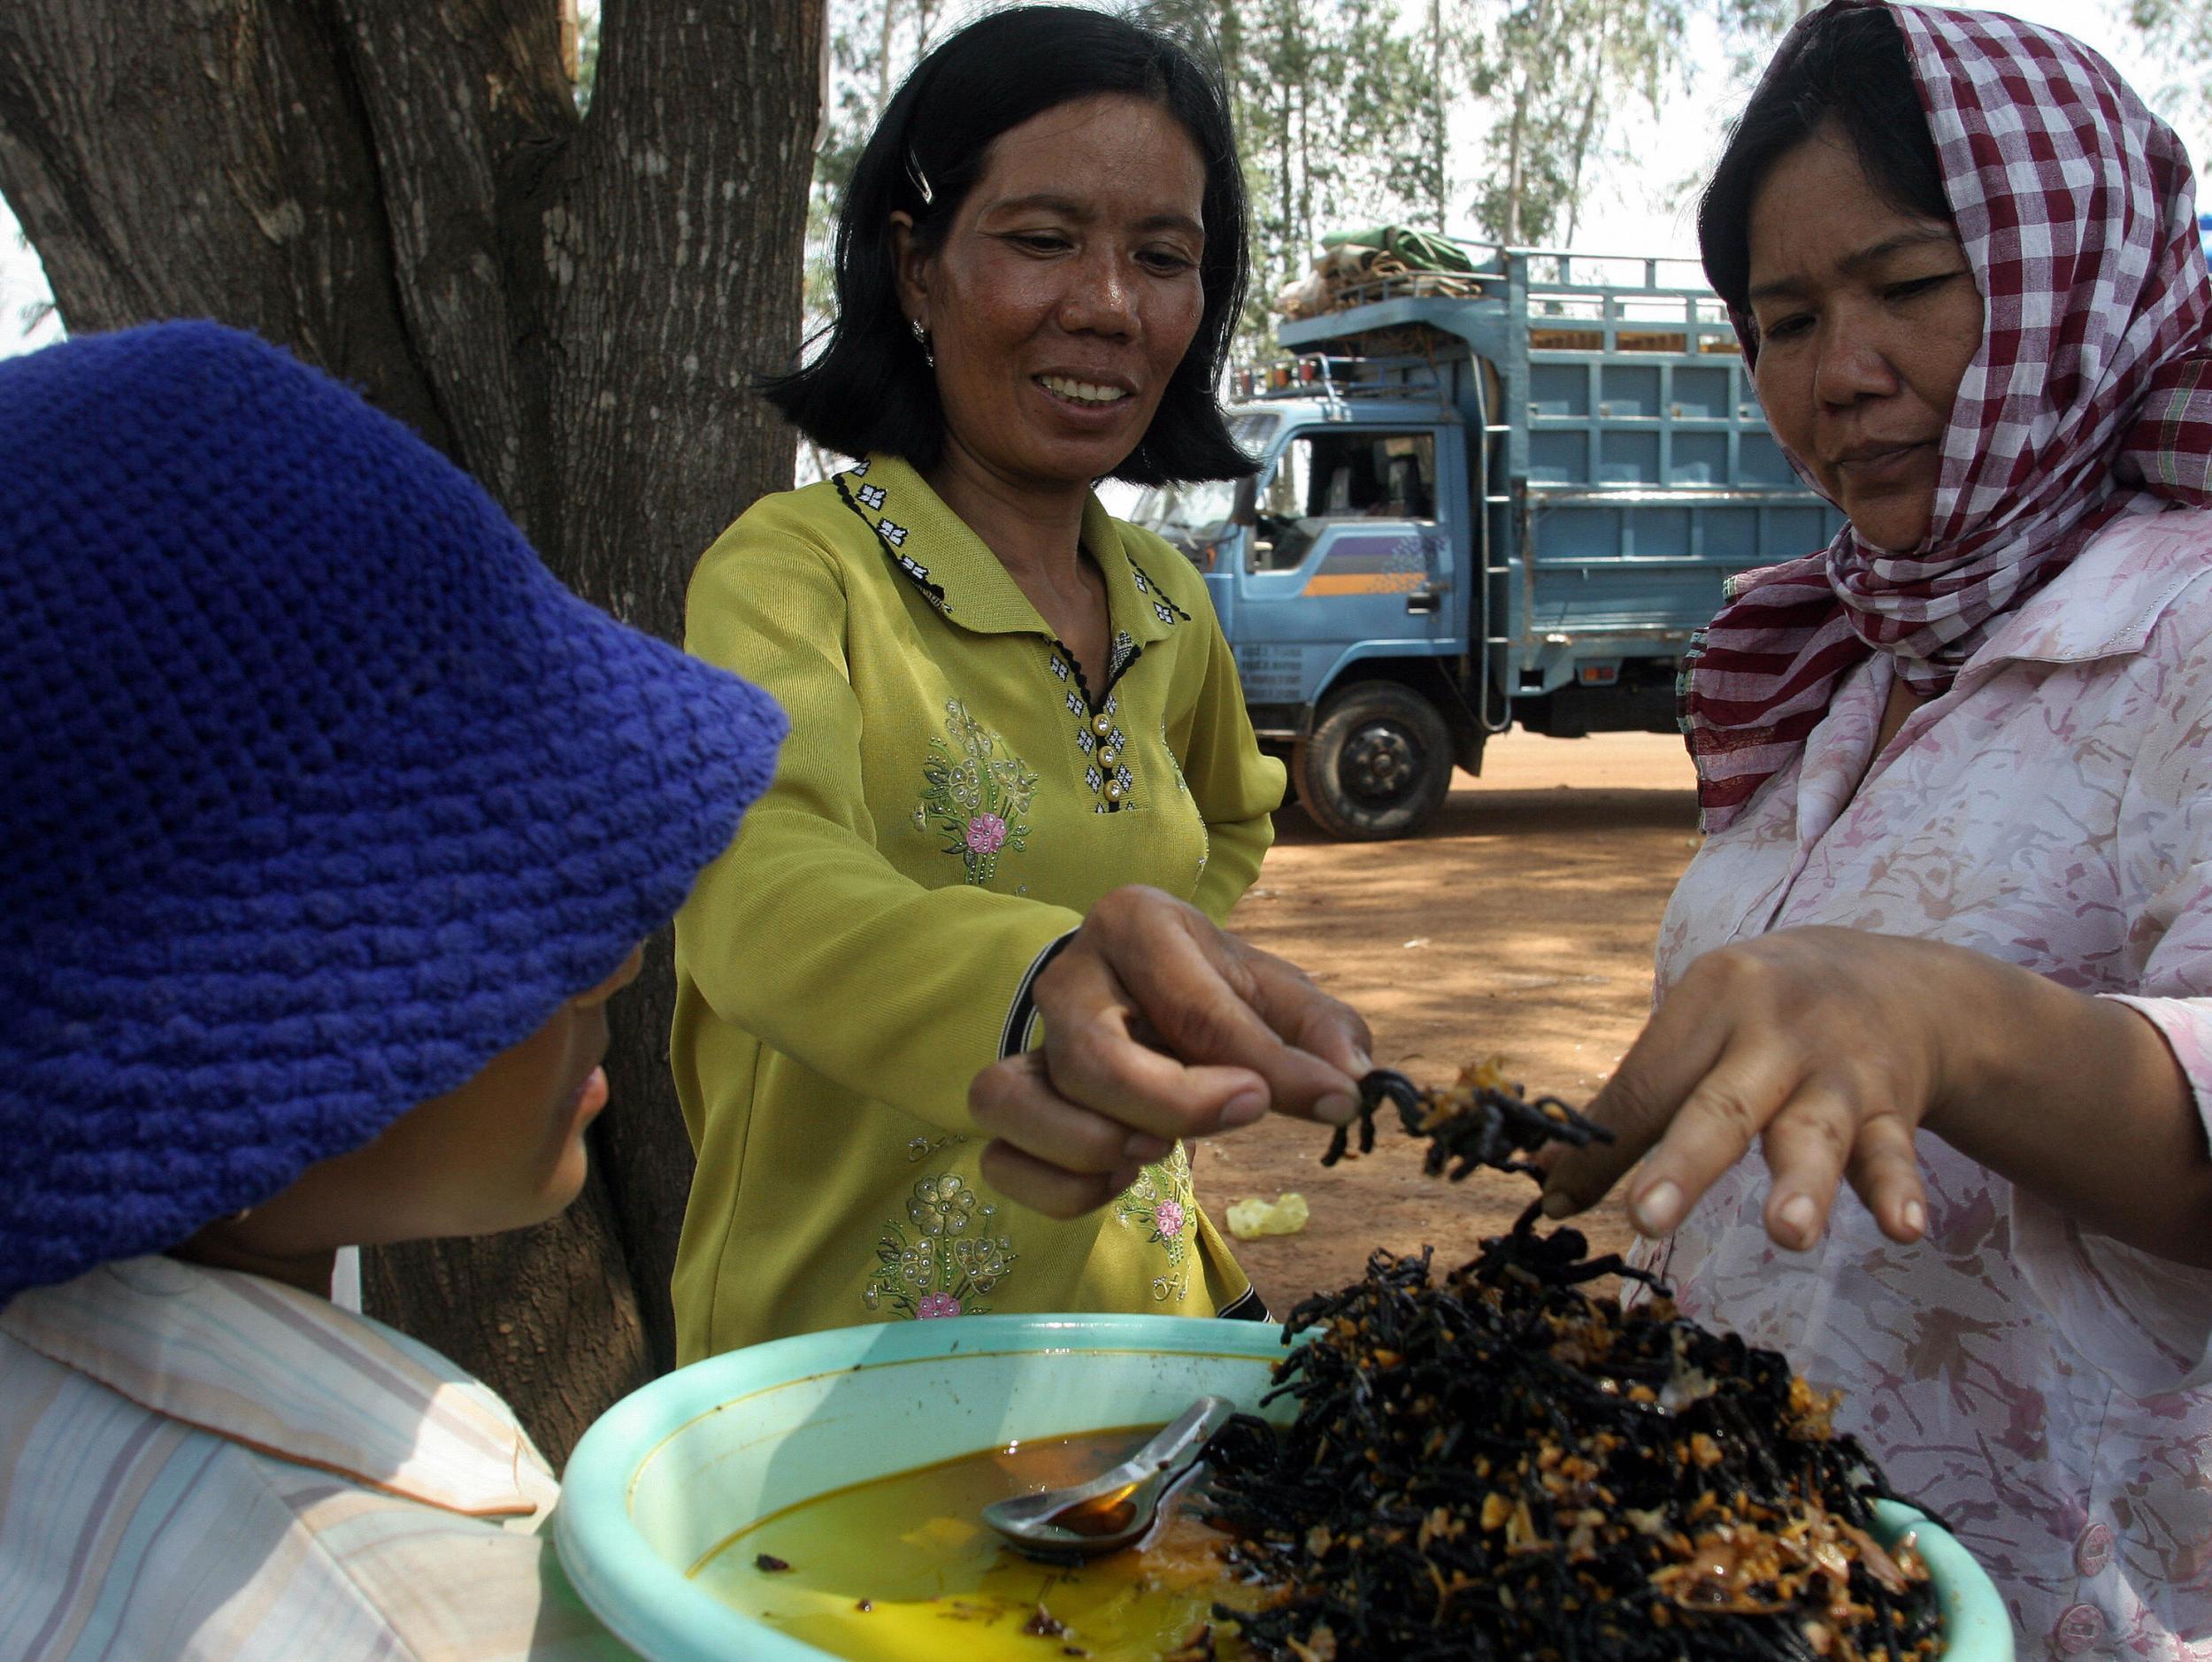 How about a nice plate of fried tarantulas in Cambodia?